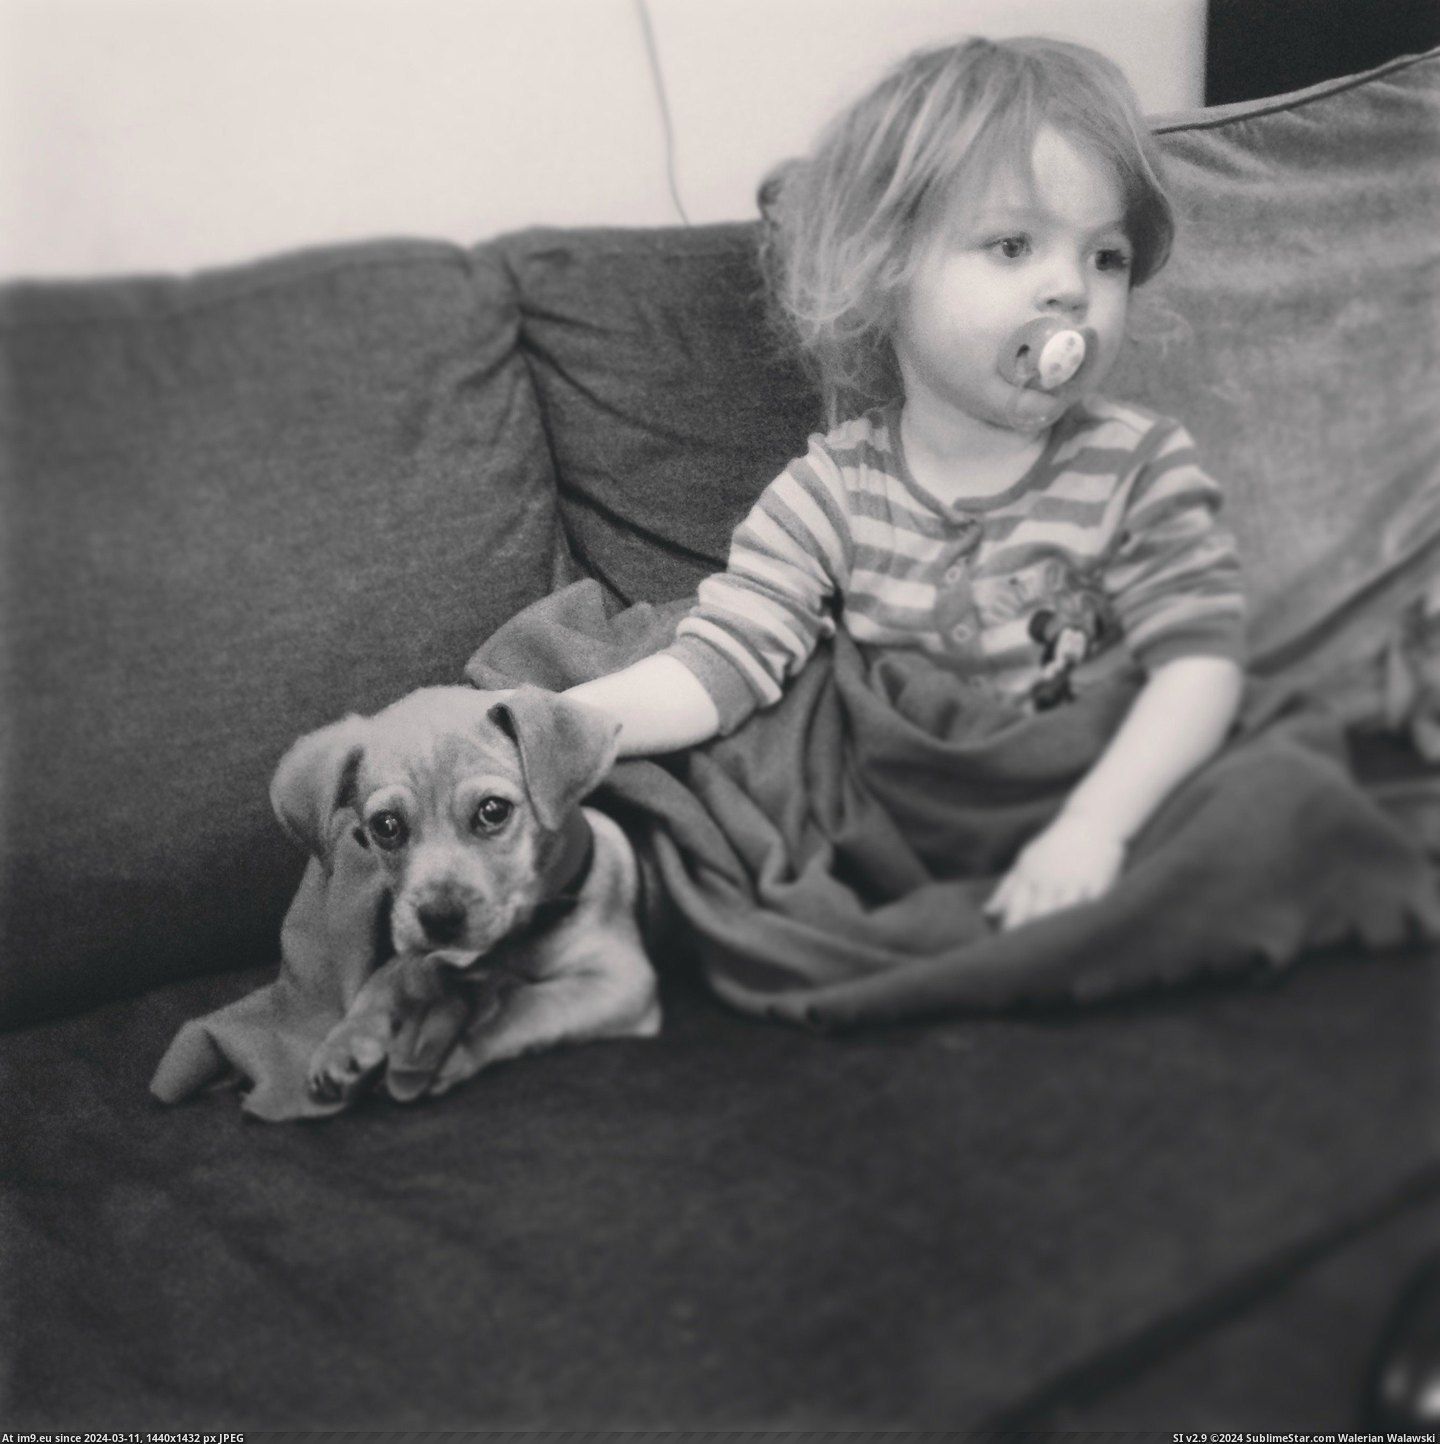 #Thought #Meet #Mad #Mollie #Puggle #Jack #Pup #Toddler [Aww] Everyone thought I was mad getting a puggle pup when I have a toddler already.... everyone meet Mollie and Jack. 1 Pic. (Изображение из альбом My r/AWW favs))